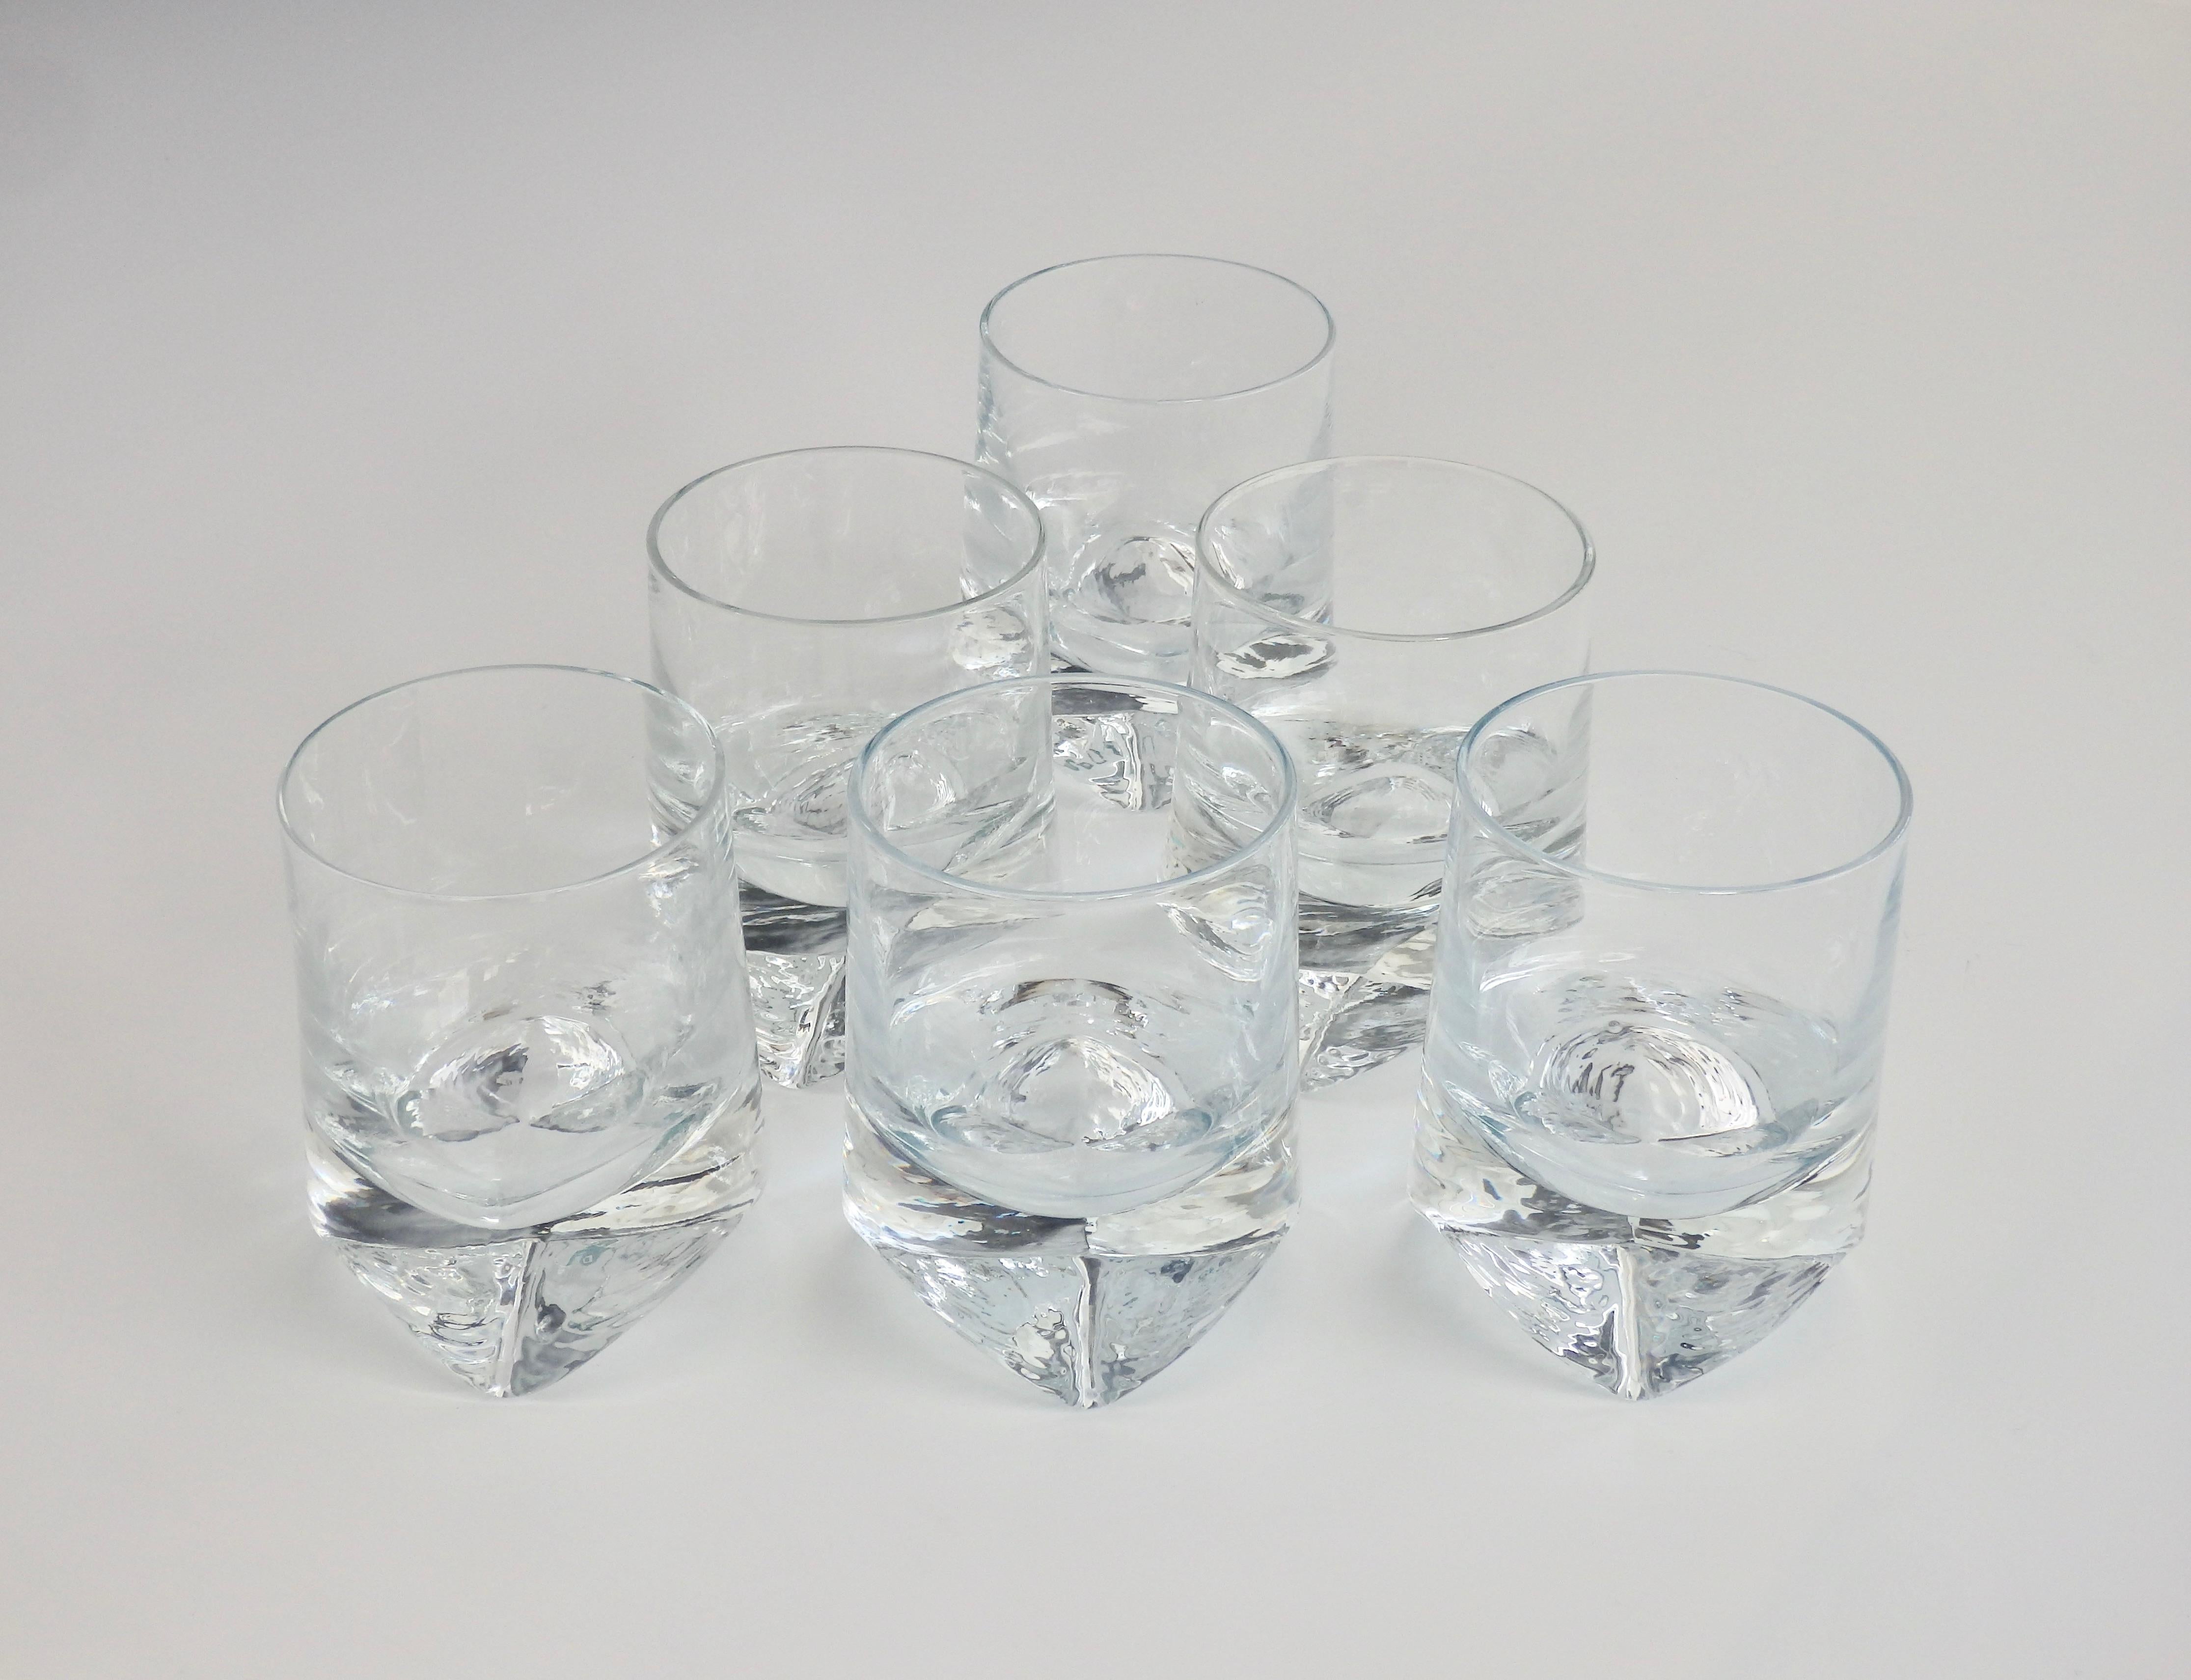 Six Clear Whiskey Bourbon Scotch or Rocks Glasses For Sale 1